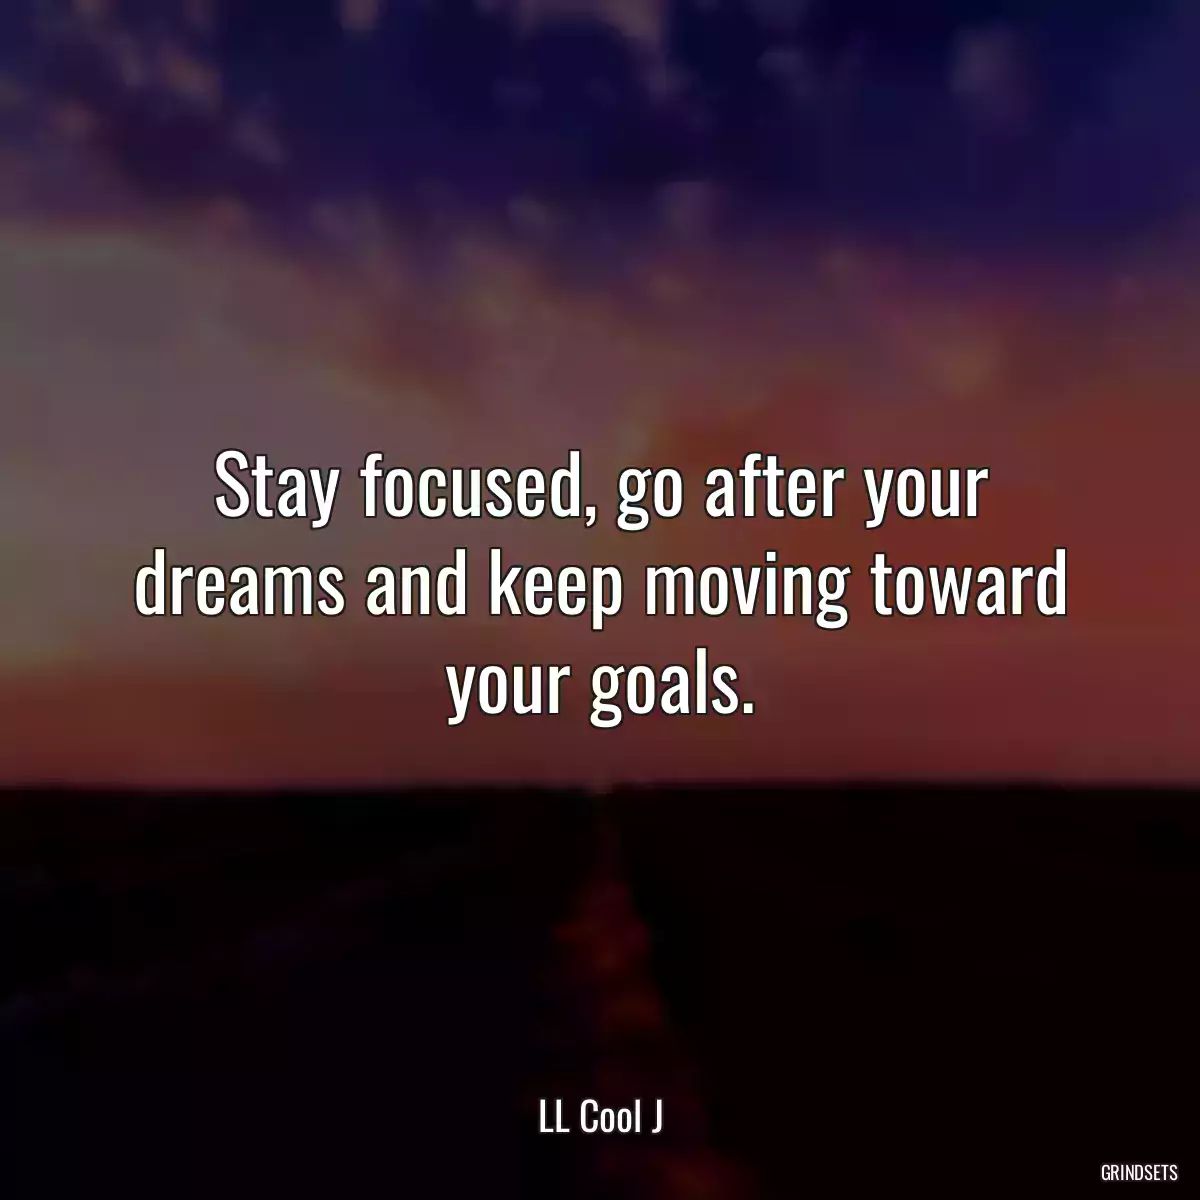 Stay focused, go after your dreams and keep moving toward your goals.